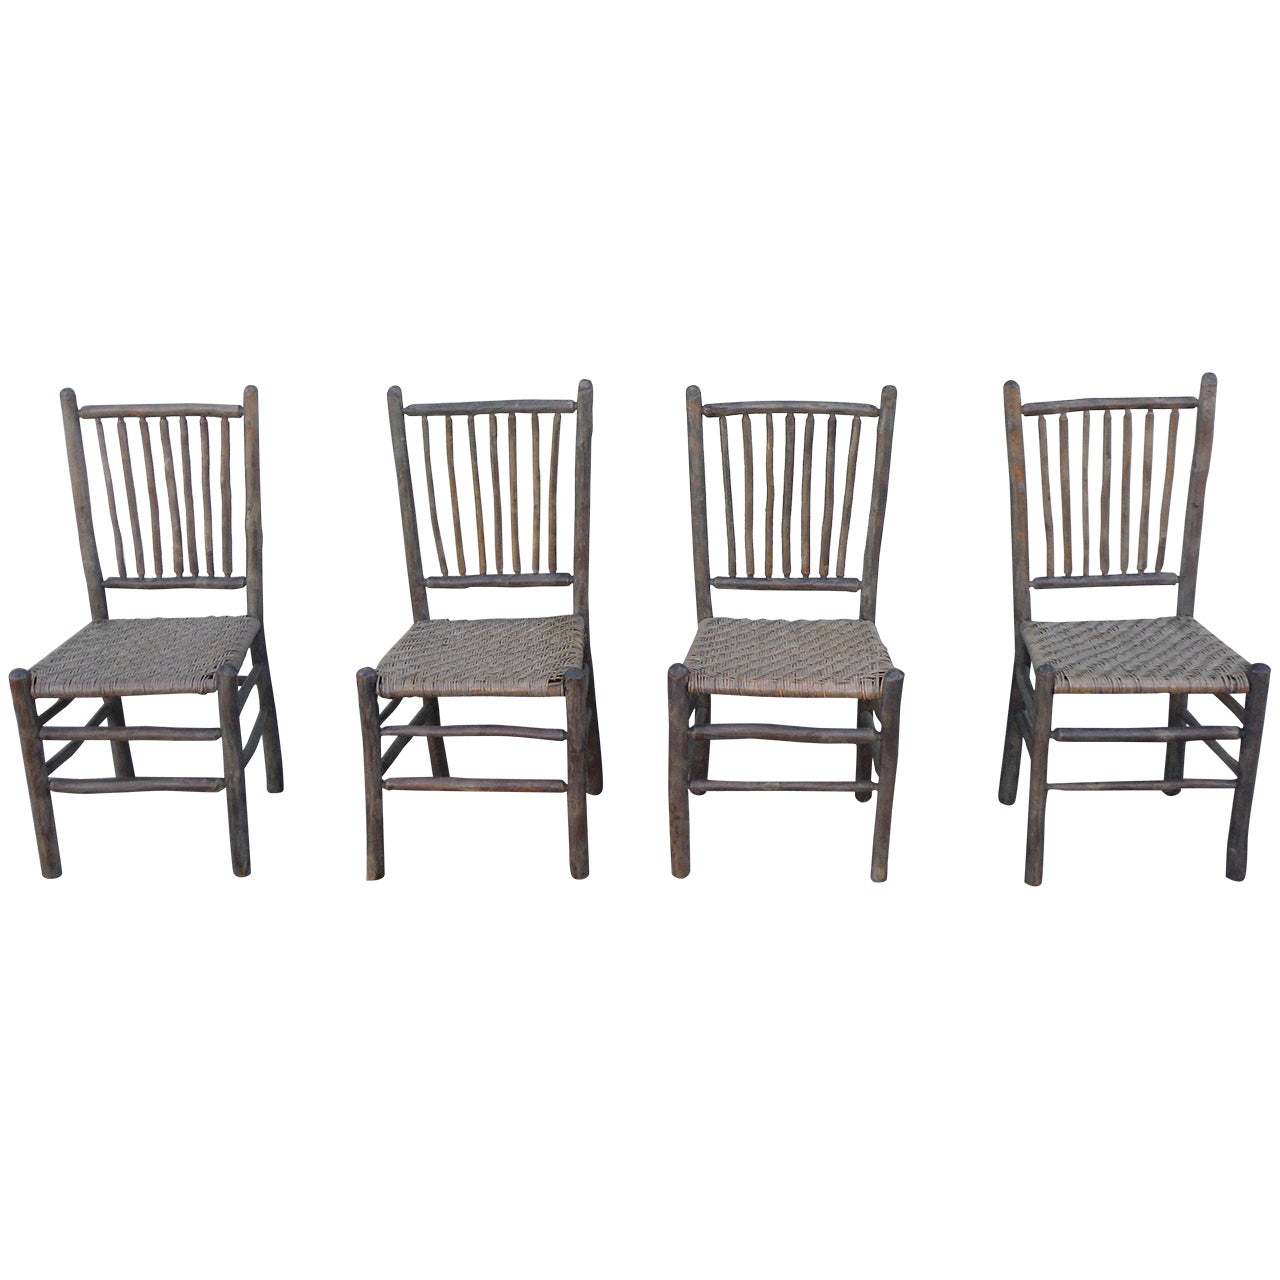 Signed Old Hickory Original Grey Painted Hickory Chairs 